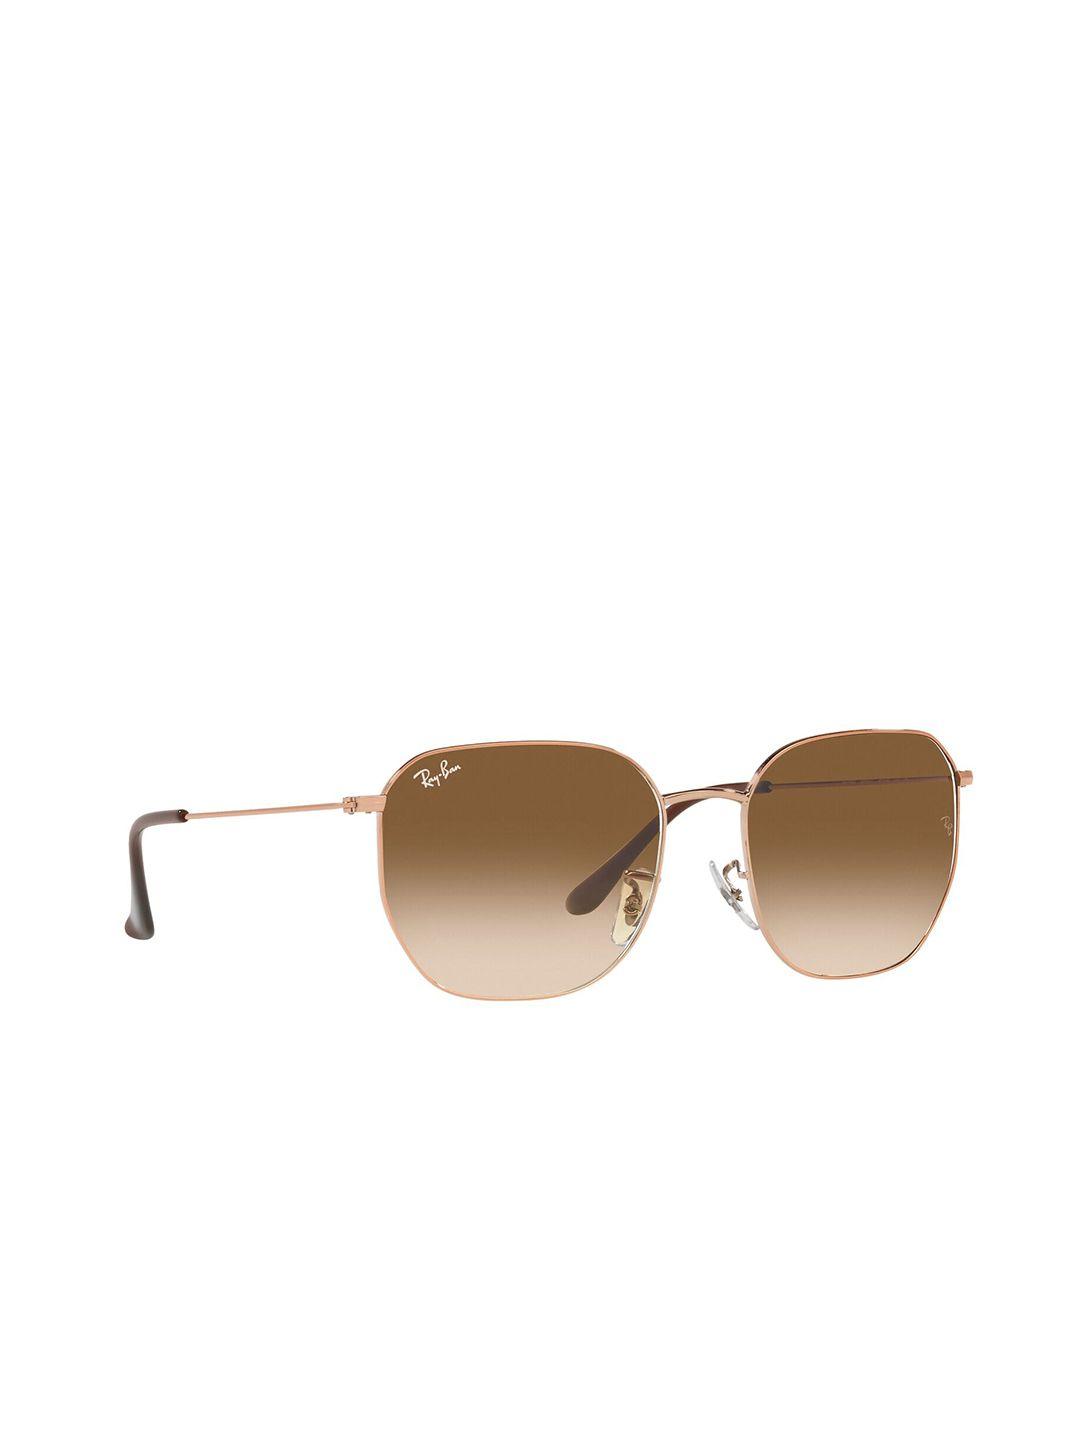 ray-ban other sunglasses with uv protected lens 8056597630023